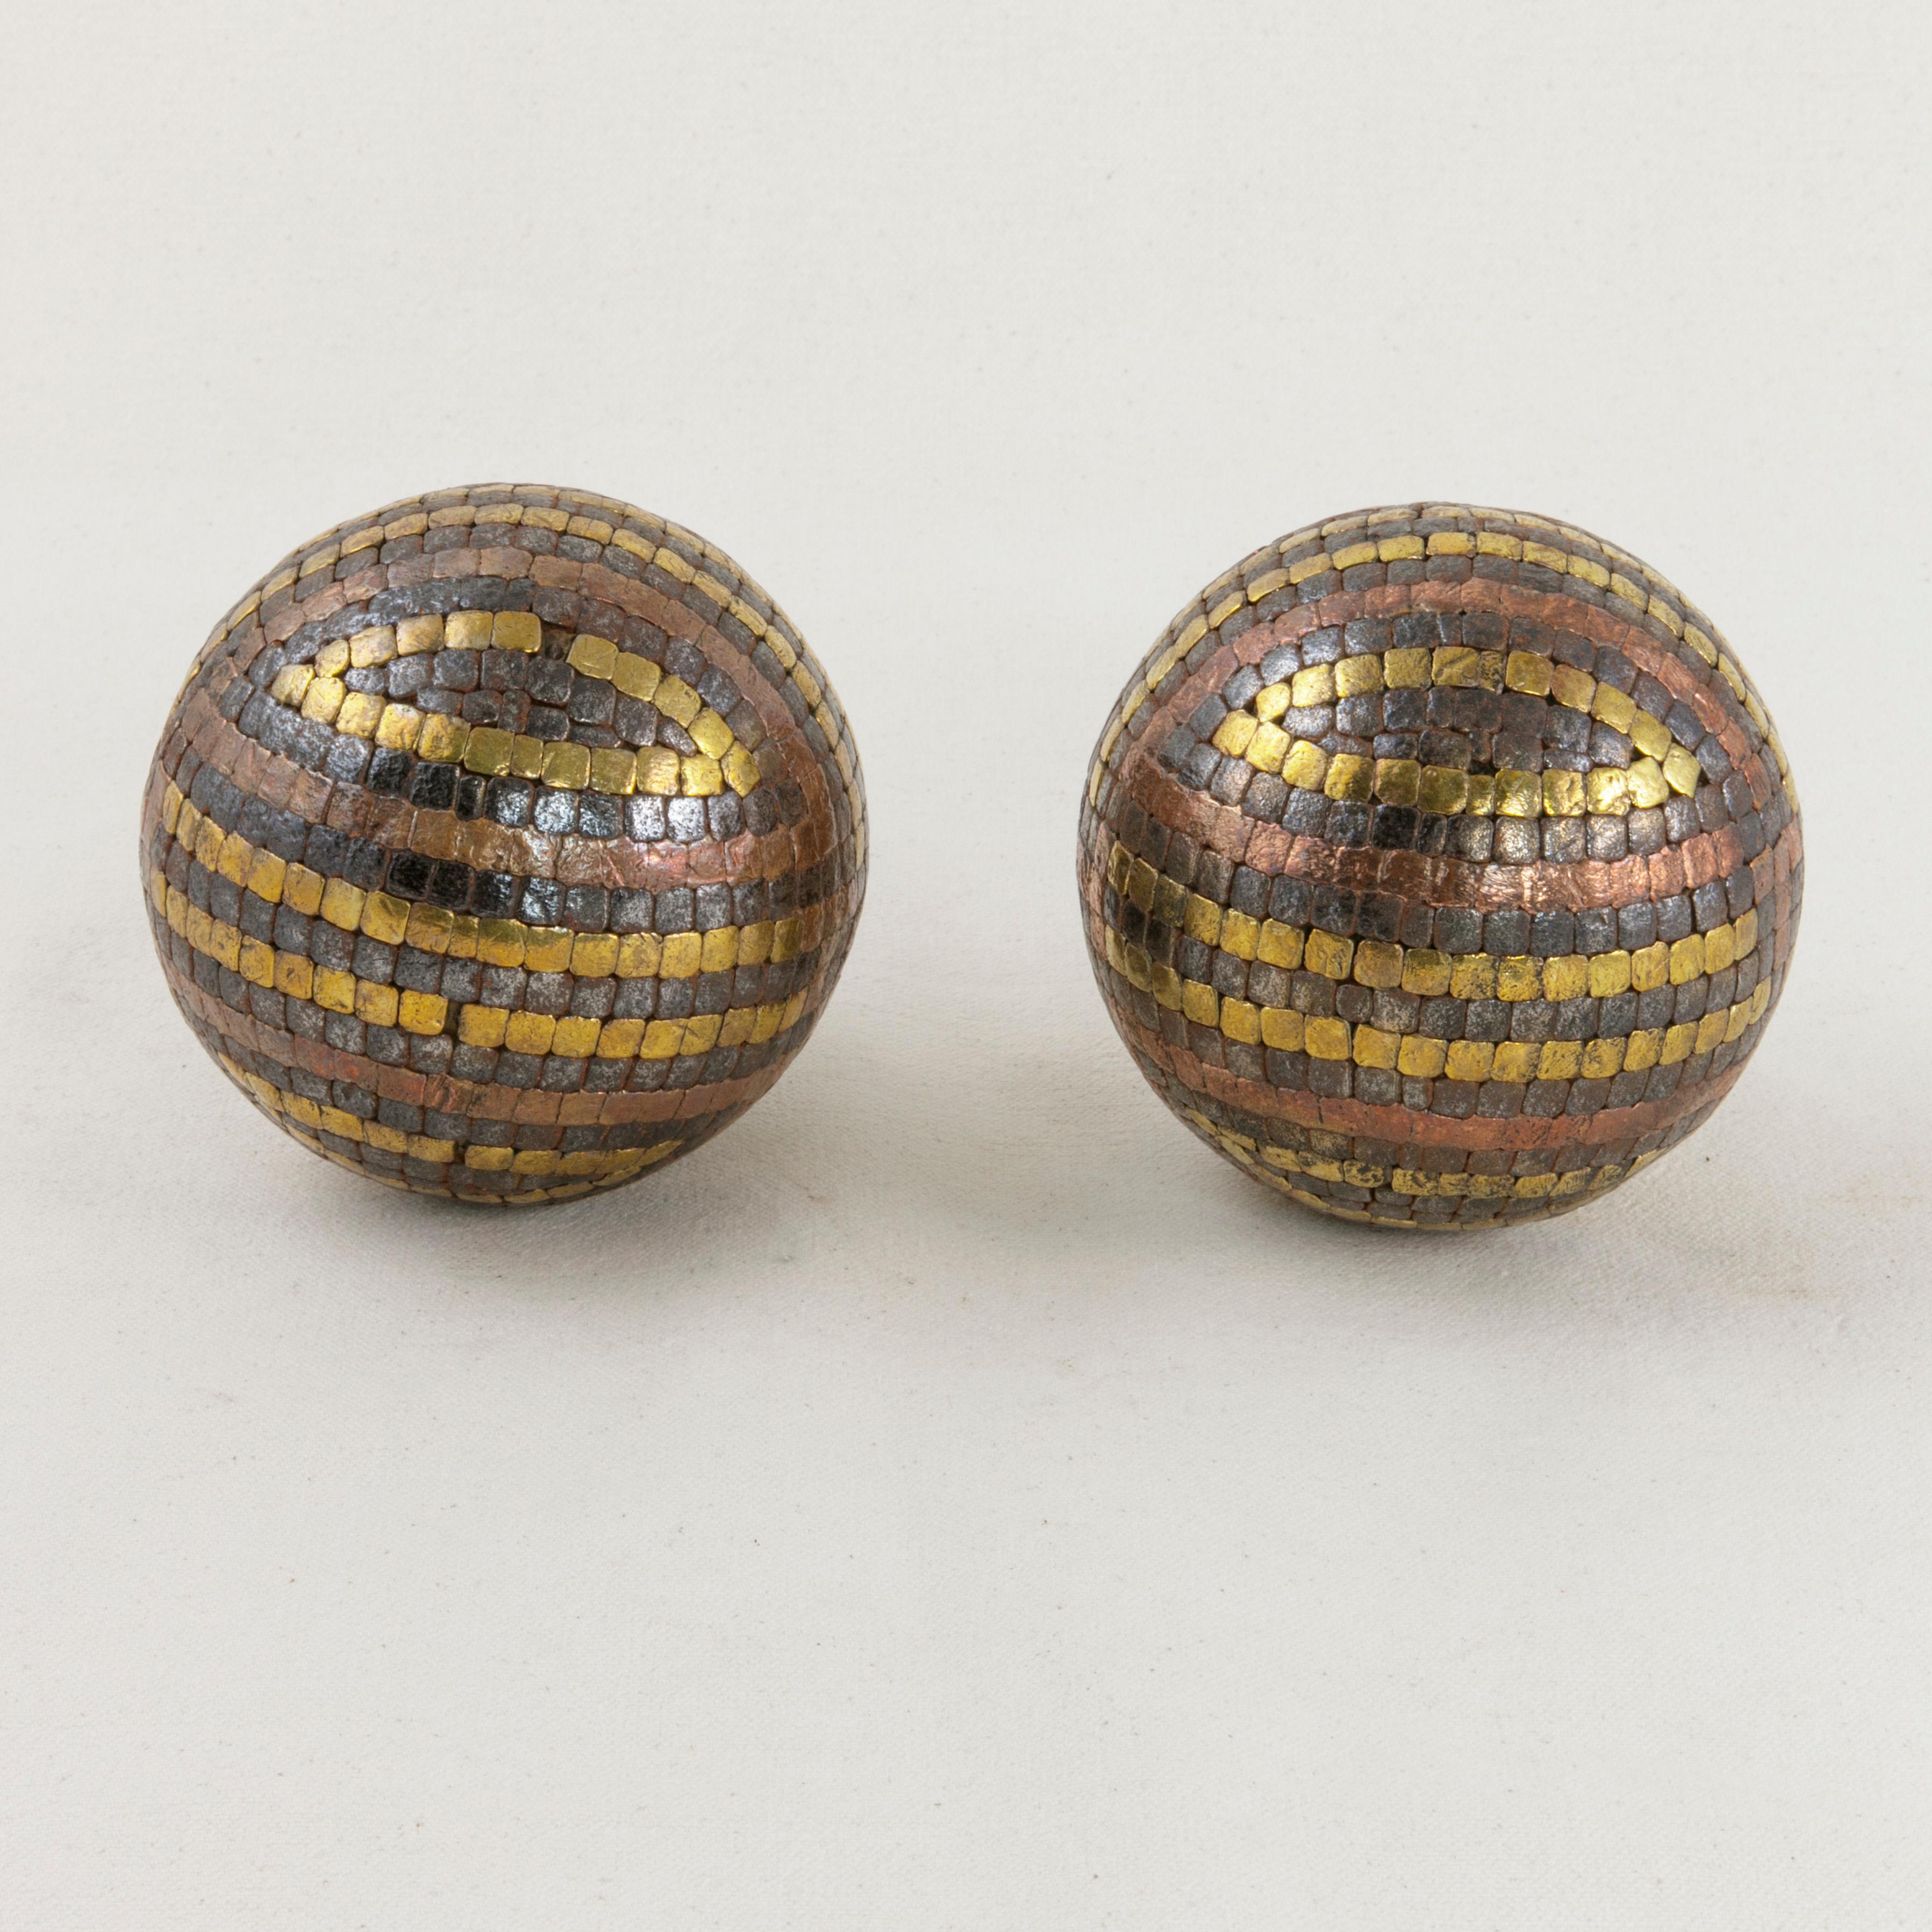 This pair of French artisan-made petanque balls from the early 20th century features copper, brass, and iron stud nails that form a cross pattern around its wooden core. Petanque is a lawn ball game played in the south of France much like bocce ball